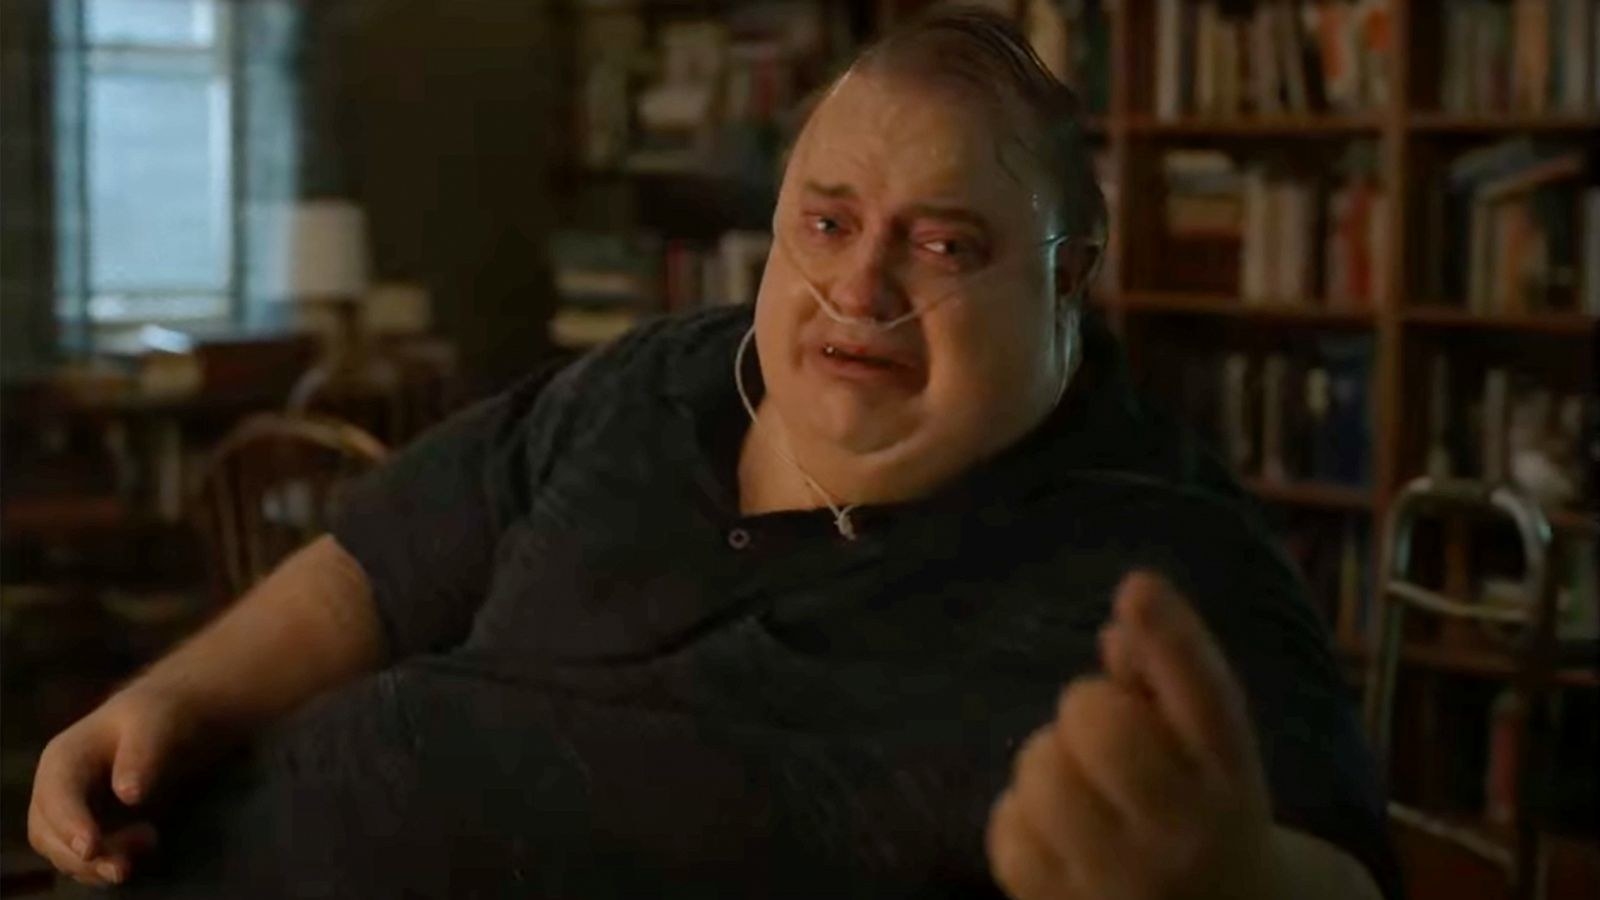 Brendan Fraser in The Whale, his character Charlie sits in a chair with a nasal cannula reaching out to his daughter off screen